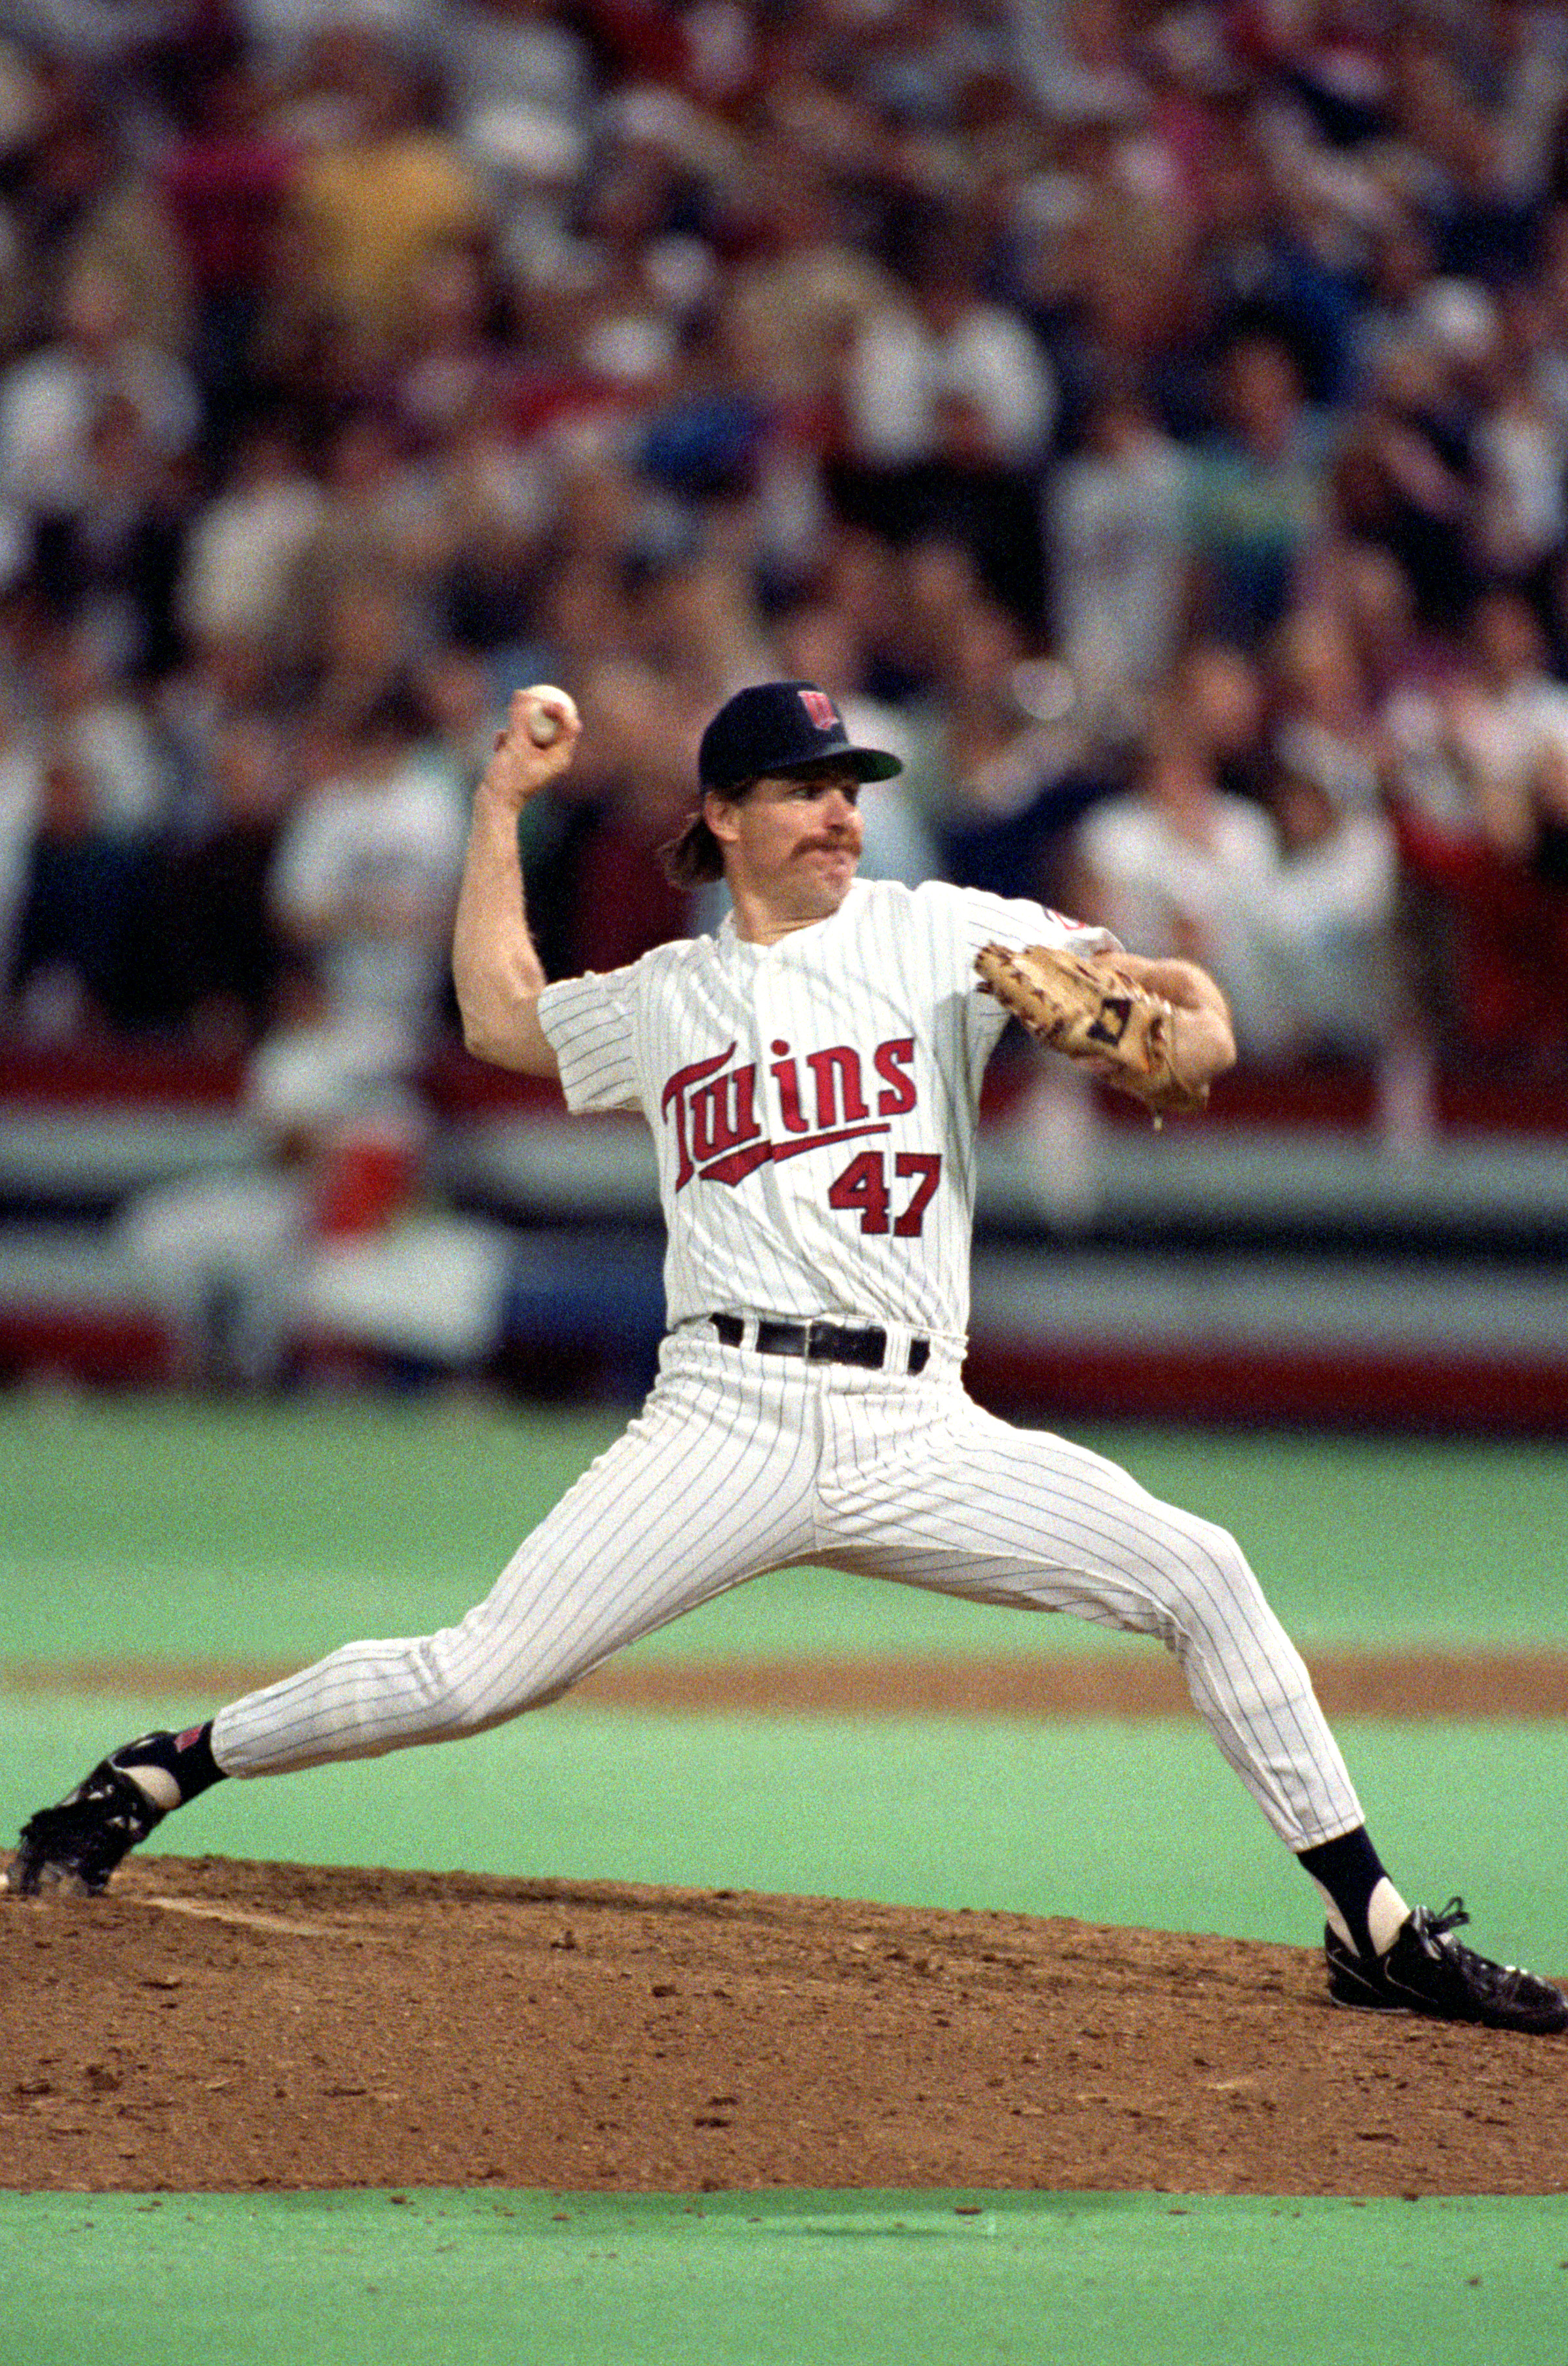 MINNEAPOLIS - OCTOBER 1991:  Pitcher Jack Morris #47 of the Minnesota Twins pitches during the 1991 World Series game against the Atlanta Braves in October of 1991 at the Metrodome in Minneapolis, Minnesota.  (Photo by Rick Stewart/Getty Images)